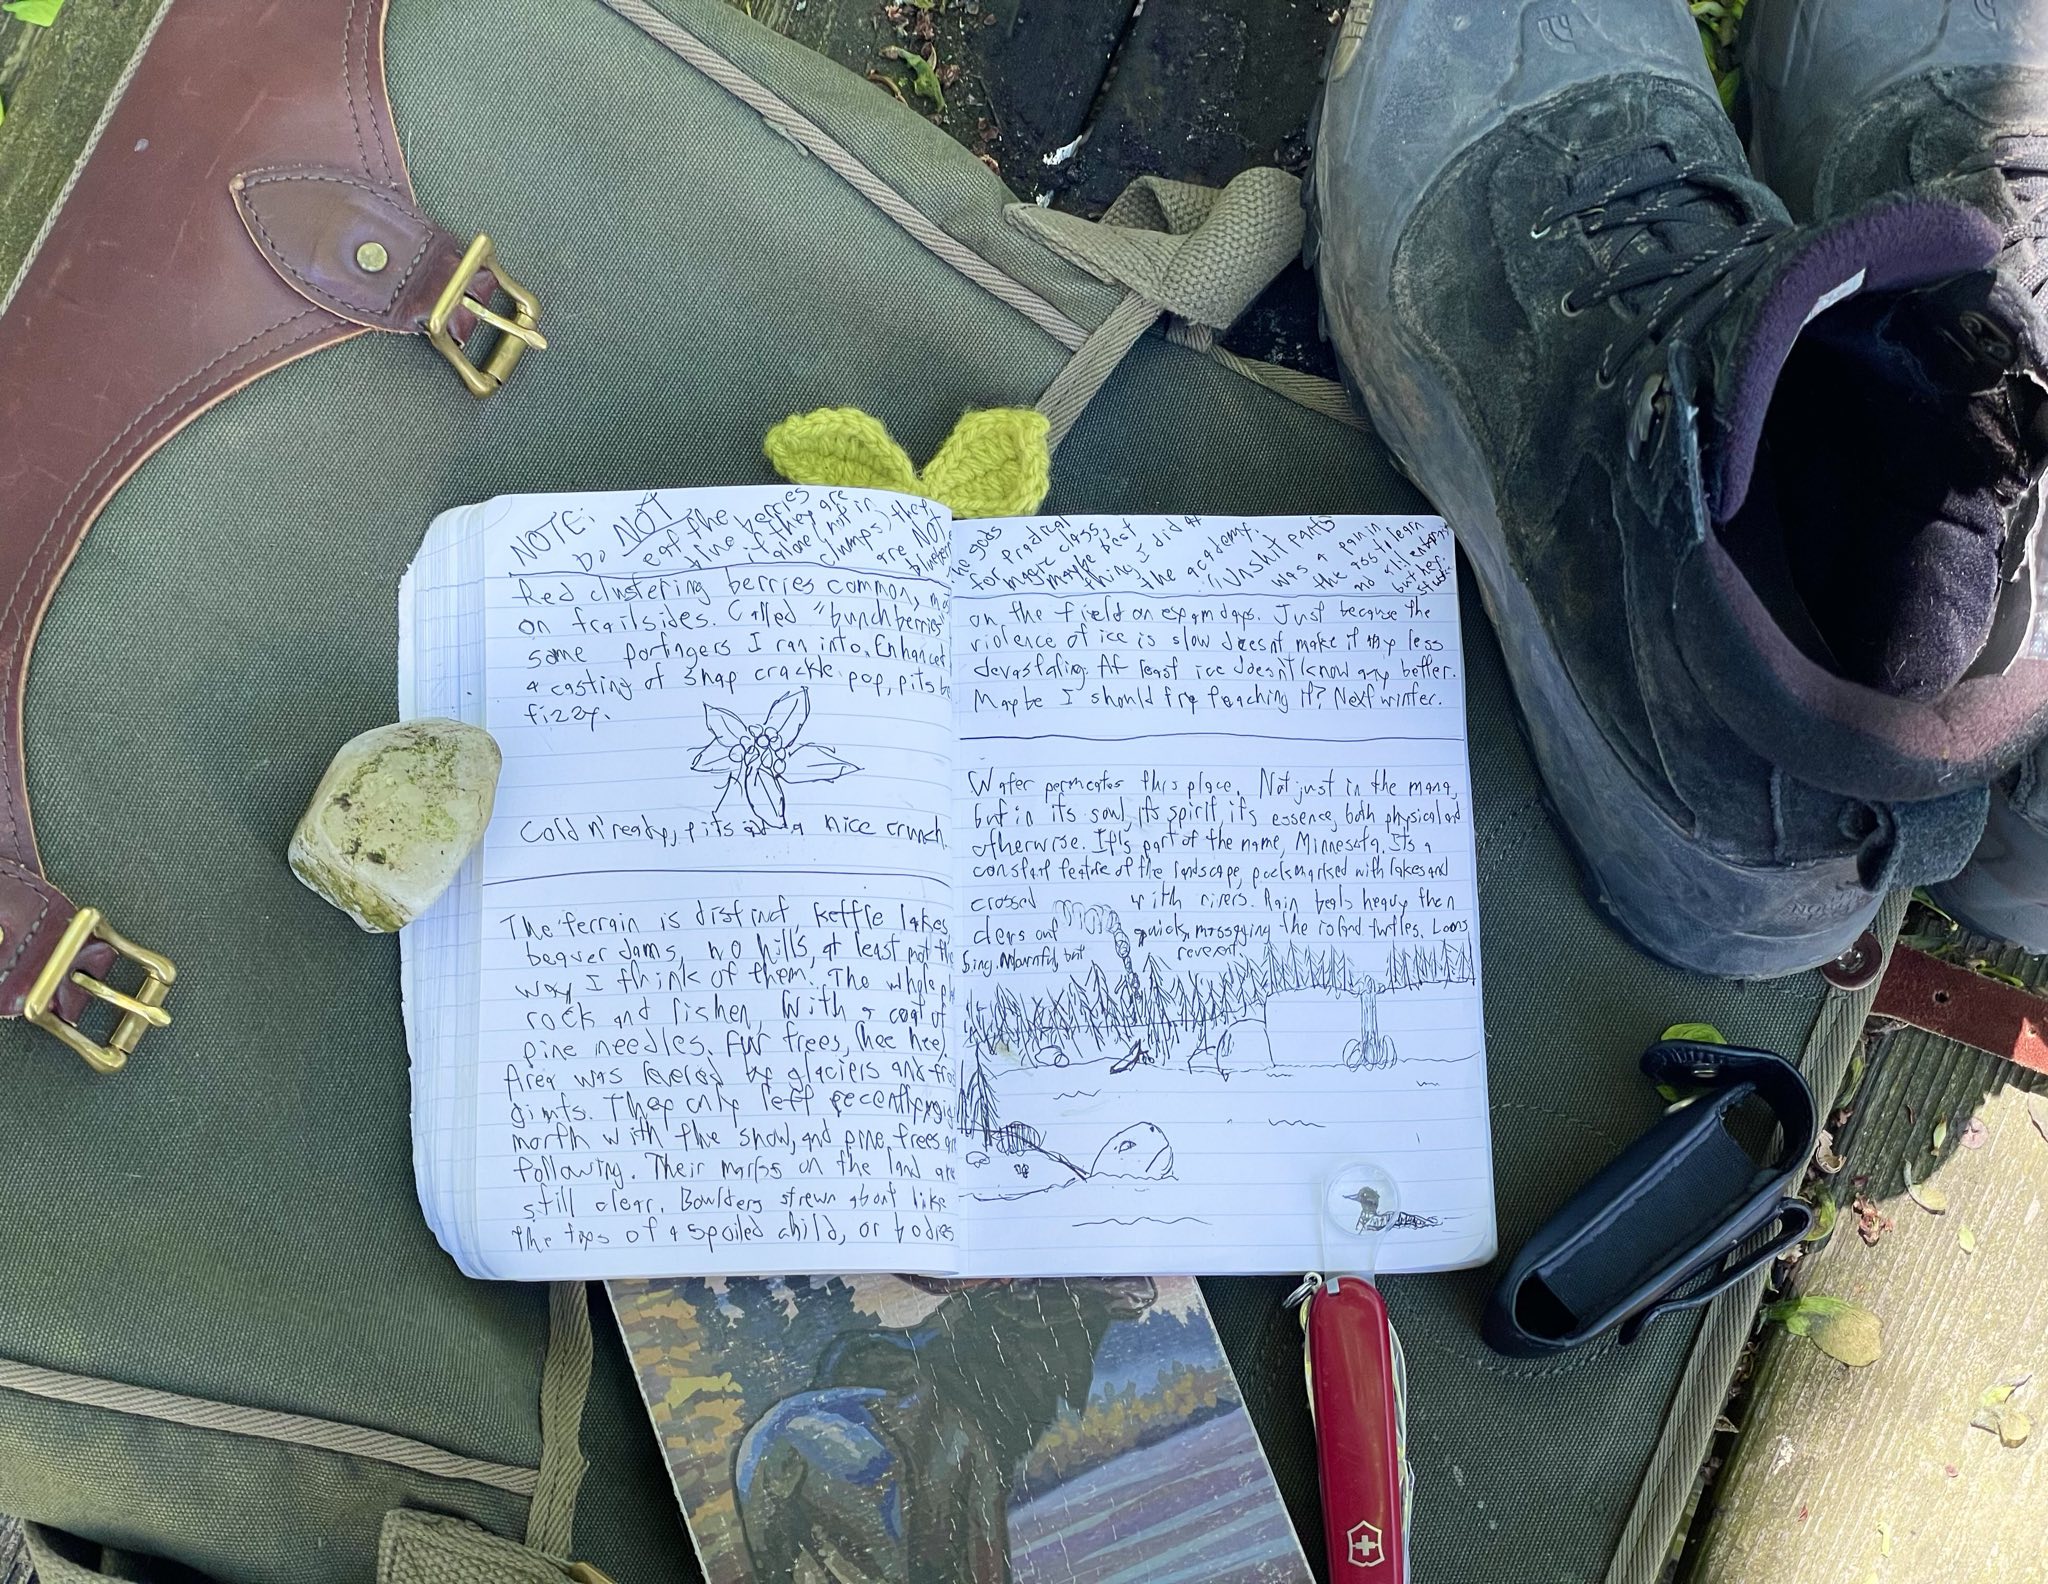 A top-down photo of an open satchel on a mossy wooden table. In the top right are worn hiking boots. In the bottom left is a Swiss Army knife. There are two notebooks in the middle of the shot. One is held open by a piece of quartz, with writing on the inside, the other is underneath it, with a cover depicting a moose on a lakeside. The open book has a knitted sprout of leaves coming out the top. The text inside the notebook reads as follows.Top of both pages: NOTE: Do NOT eat the blueberries if they are alone (not in clumps) they are NOT blueberries. Thank the gods for practical magic class, maybe best thing I did at the academy. 'Unshit pants' was a pain in the ass to learn and a lil embarrassing but hey, it works. Left page: Red clustering berries common, mostly on the trailsides. Called 'bunchberries' by some portagers I ran into. Enhanced by a casting of snap crackle pop, pits become fizzy. [A sketch of a clump of circular berries with five leaves radiating outwards from them] Cold n' ready, pits add a nice crunch. [Horizontal line separating entries] The terrain is distinct. Kettle lakes, beaver dams, no hills, at least not the way I think of them. The whole place is rock and lichen, with a coat of pine needles. Fur trees, (hee hee). Area was leveled by glaciers and frost giants. They only left recently, migrating north with the snow, and pine trees following. Their marks on the land are still clear. Boulders strewn about like the toys of a spoiled child, or bodies. Right page: on the field on exam days. Just because the violence of ice is slow doesn't make it any less devastating. At least ice doesn't know any better. Maybe I should teach it? Next winter. [Horizontal line separating entries] Water permeates this place. Not just in the mana, but in its soul, its spirit, its essence, both physical and otherwise. It's part of the name, Minnesota. It's a constant feature of the landscape, pockmarked with lakes and crossed with rivers. Rain beats heavy then clears out quick, massaging the island turtles. Loons sing. Mournful, but reverent. [Sketch of a lakeside scene. In the left foreground, a small island adorned with trees and rocks reveals itself as a turtle as it pokes up its head. On the right foreground, a common loon floats on the water. In the background, a shoreline is seen entirely covered in pine trees. On the left is a pulled up canoe and two oars, with a column of smoke rising from the forest behind them. On the right is a cliff face, with a waterfall spilling over the edge.].